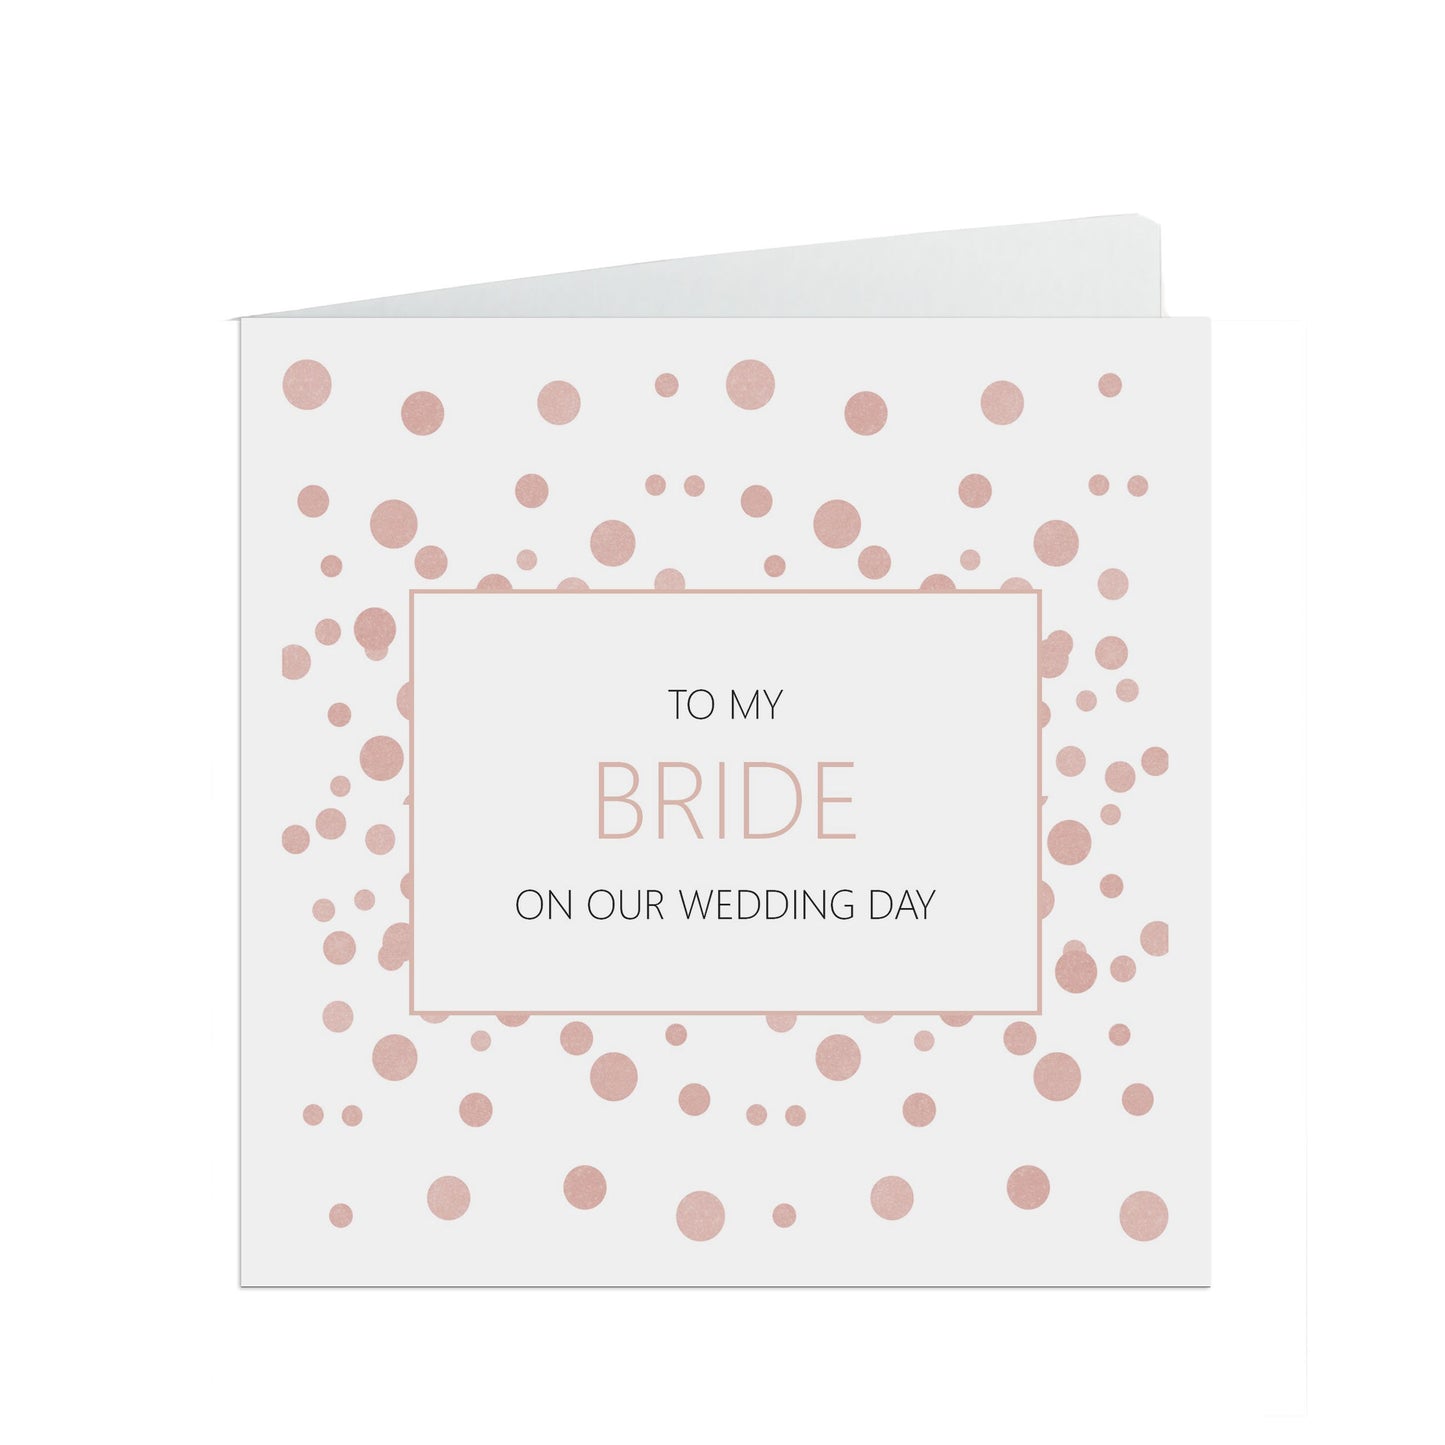 Bride On Our Wedding Day Card, Blush Confetti 6x6 Inches With A White Envelope